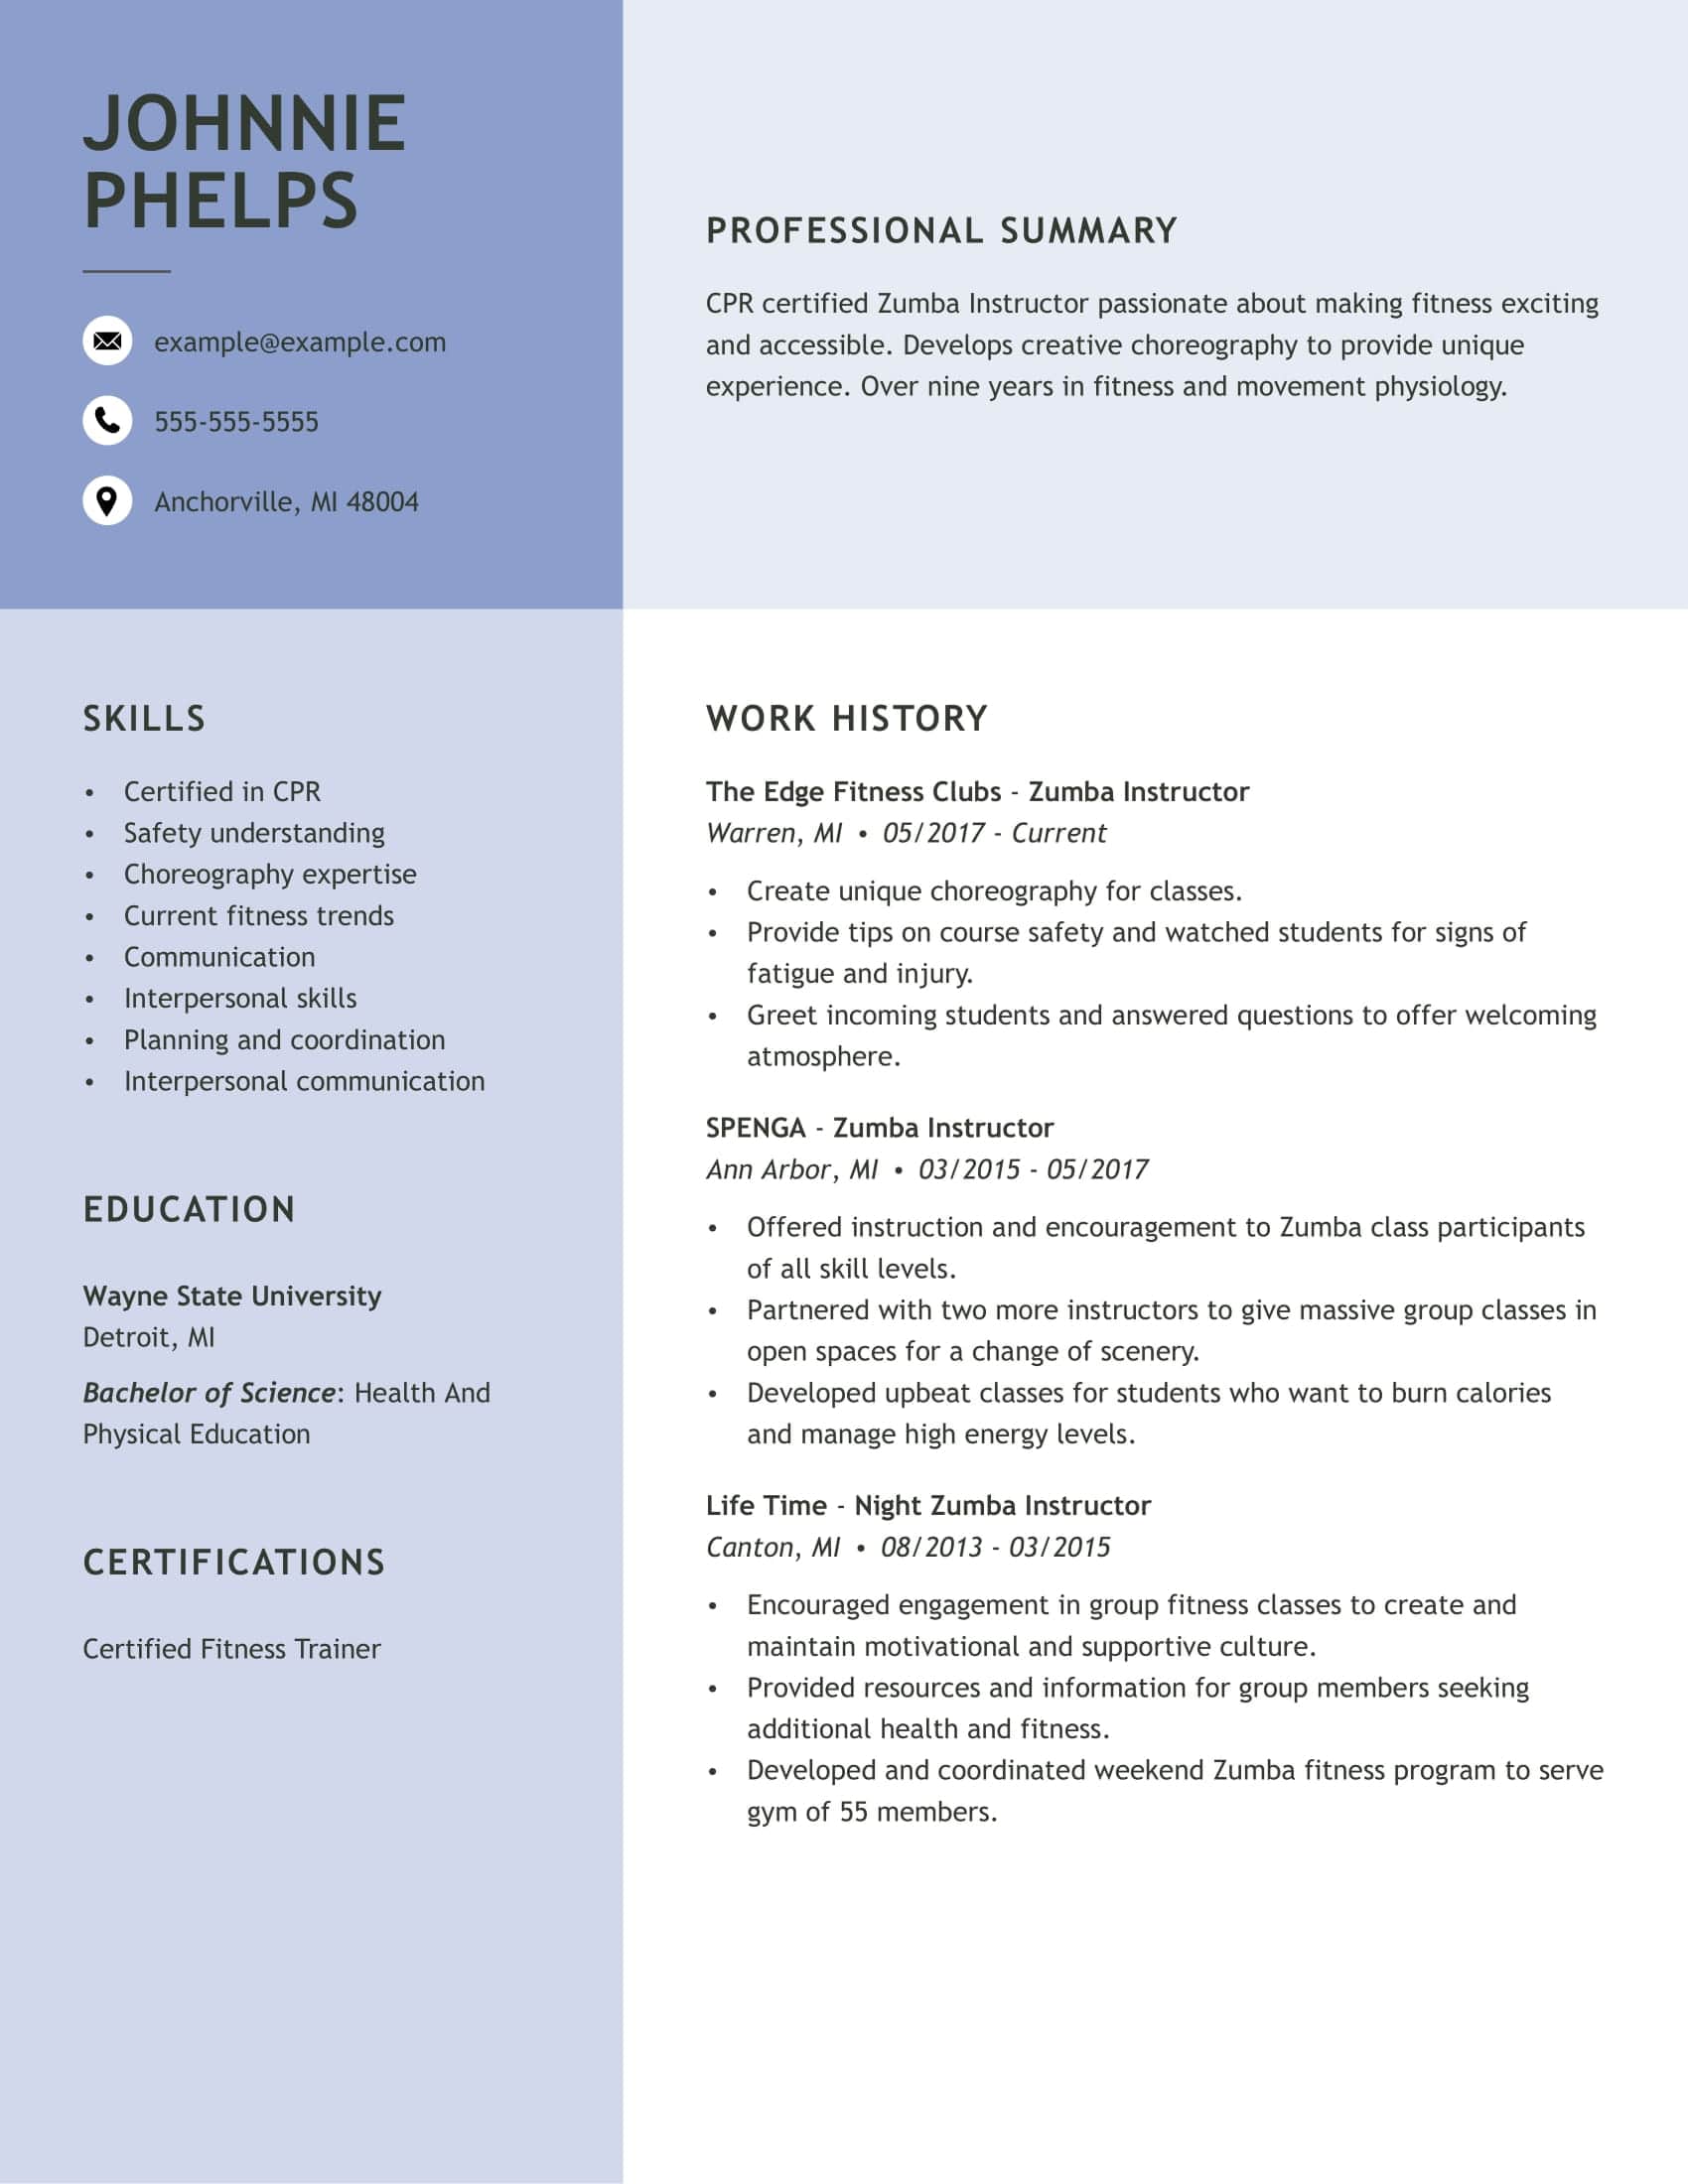 resume format for zumba instructor